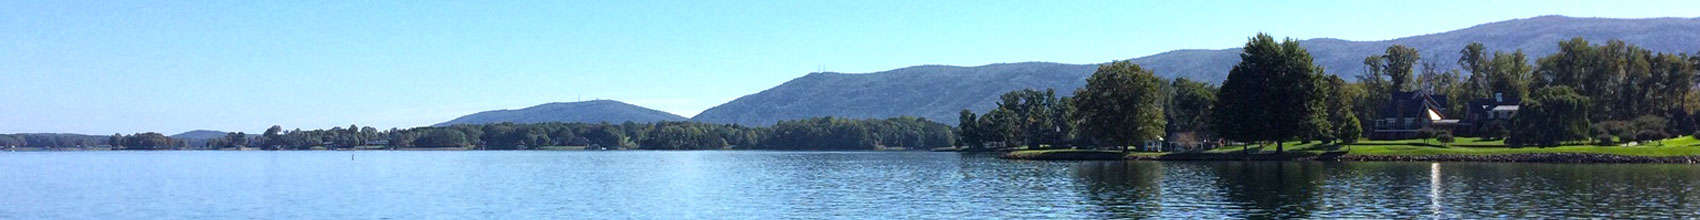 View of Smith Mountain from the lake